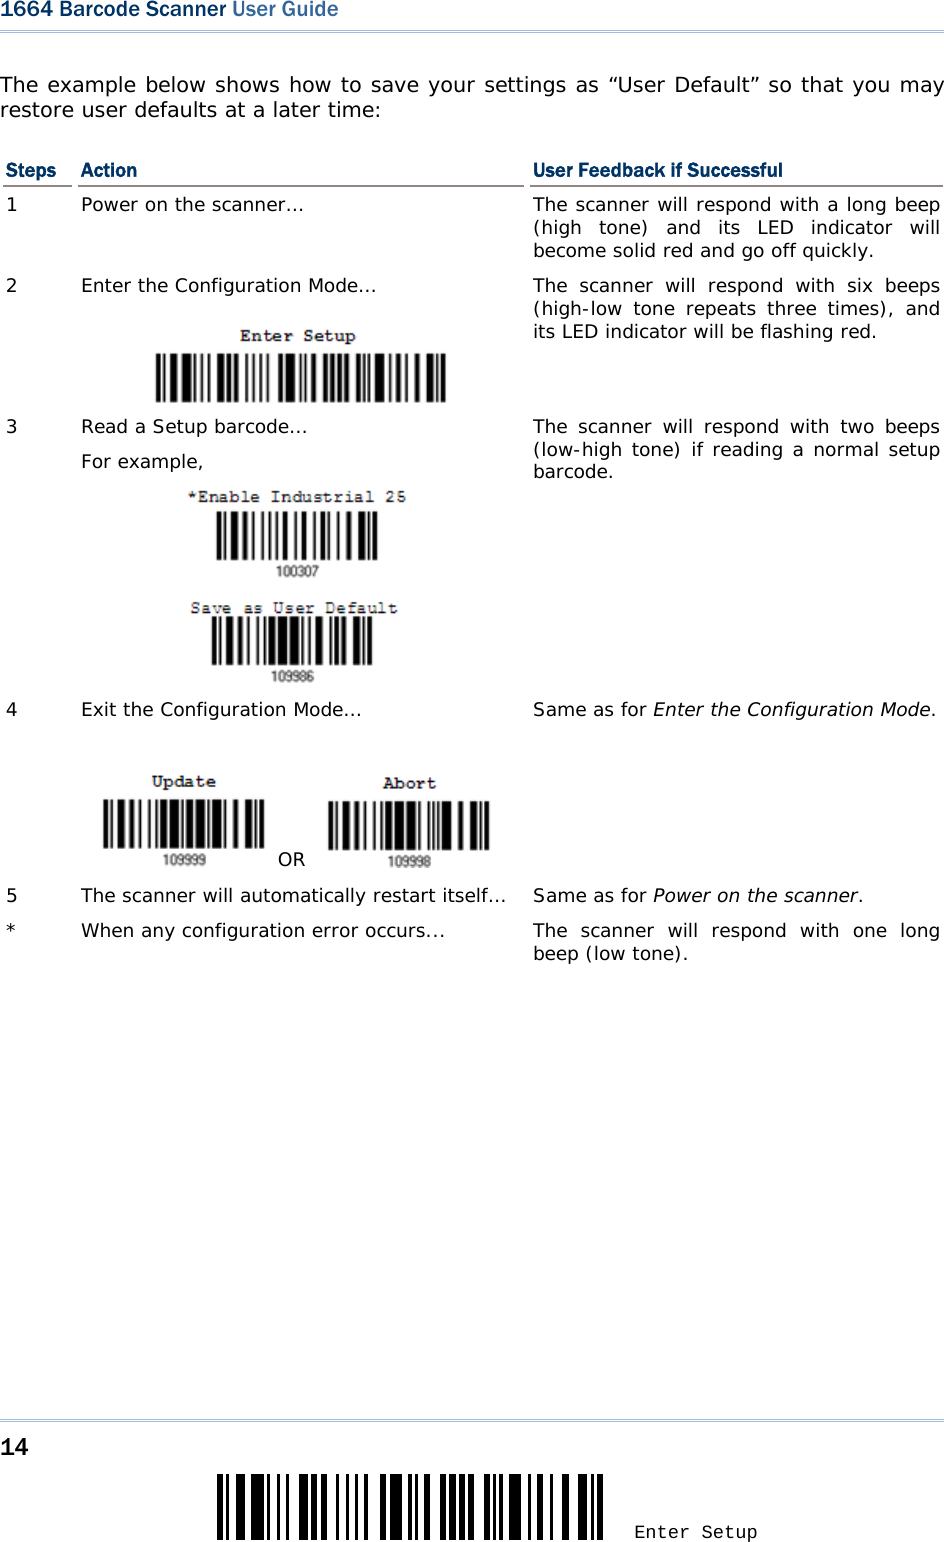 14 Enter Setup 1664 Barcode Scanner User Guide  The example below shows how to save your settings as “User Default” so that you may restore user defaults at a later time: Steps  Action  User Feedback if Successful 1  Power on the scanner… The scanner will respond with a long beep (high tone) and its LED indicator will become solid red and go off quickly. 2  Enter the Configuration Mode…  The scanner will respond with six beeps (high-low tone repeats three times), and its LED indicator will be flashing red.  3  Read a Setup barcode… For example,               The scanner will respond with two beeps (low-high tone) if reading a normal setup barcode. 4  Exit the Configuration Mode…      OR    Same as for Enter the Configuration Mode. 5  The scanner will automatically restart itself…  Same as for Power on the scanner. *  When any configuration error occurs...  The scanner will respond with one long beep (low tone).   